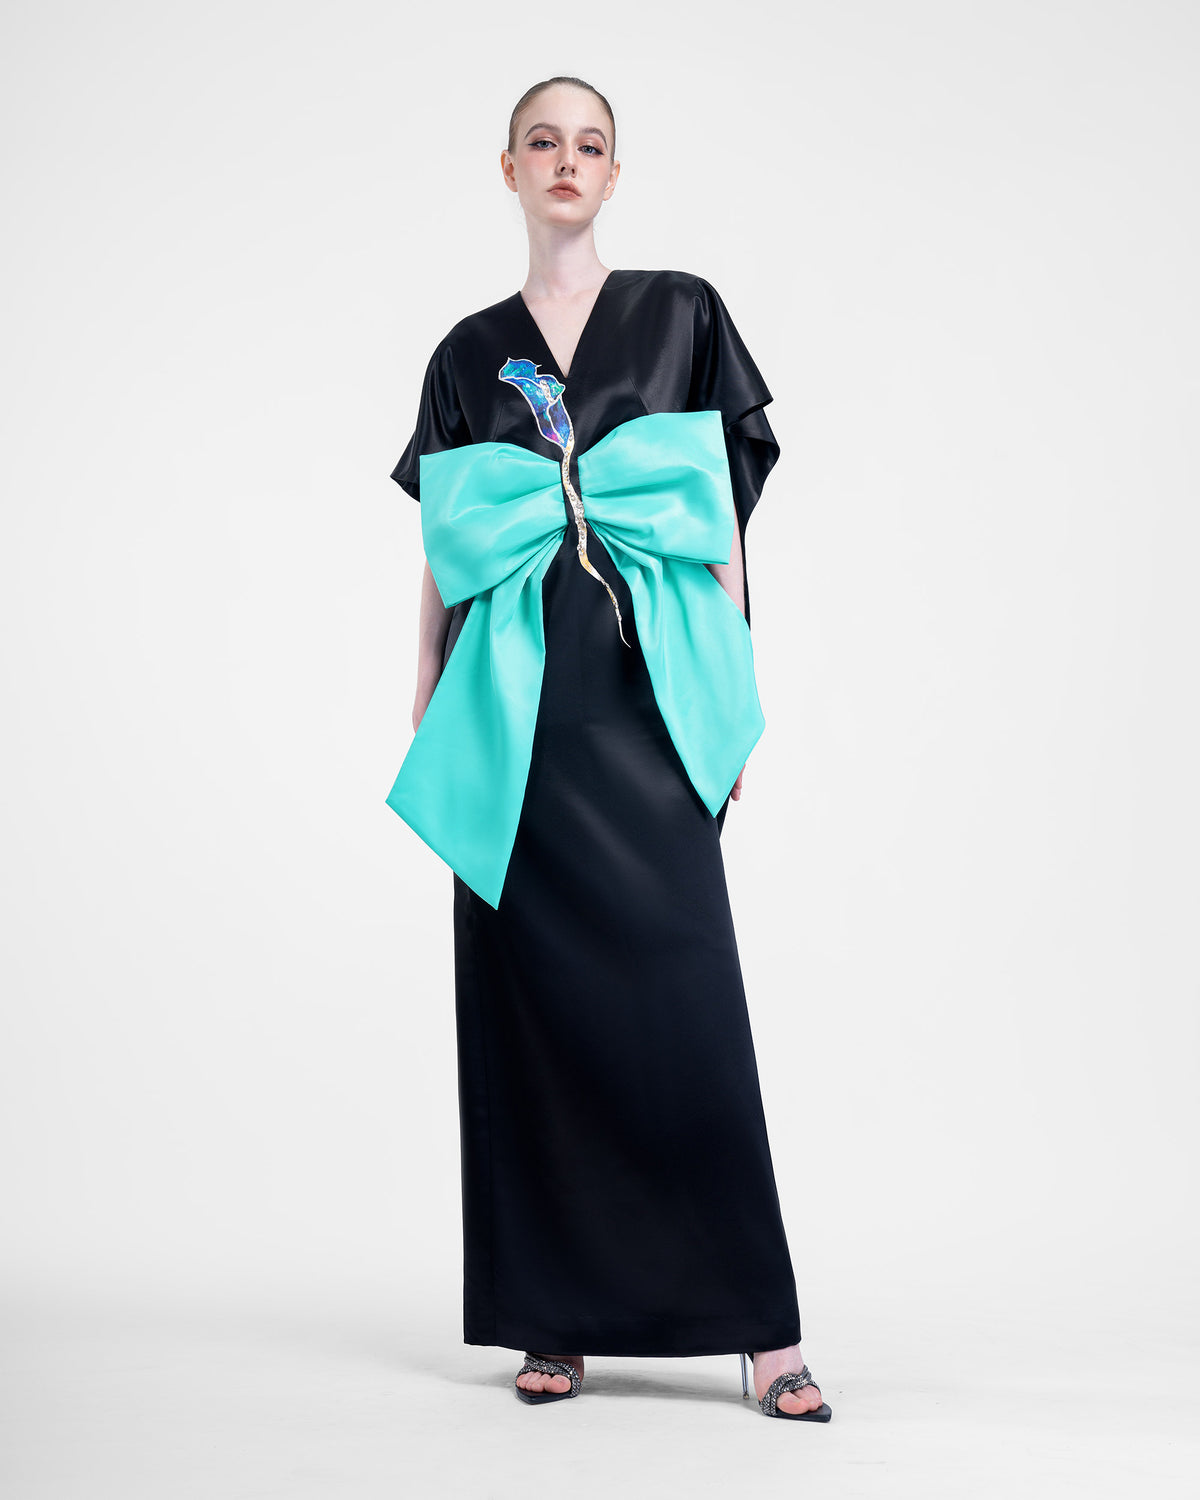 Calla Lily - Cape Sleeves Black Evening Dress